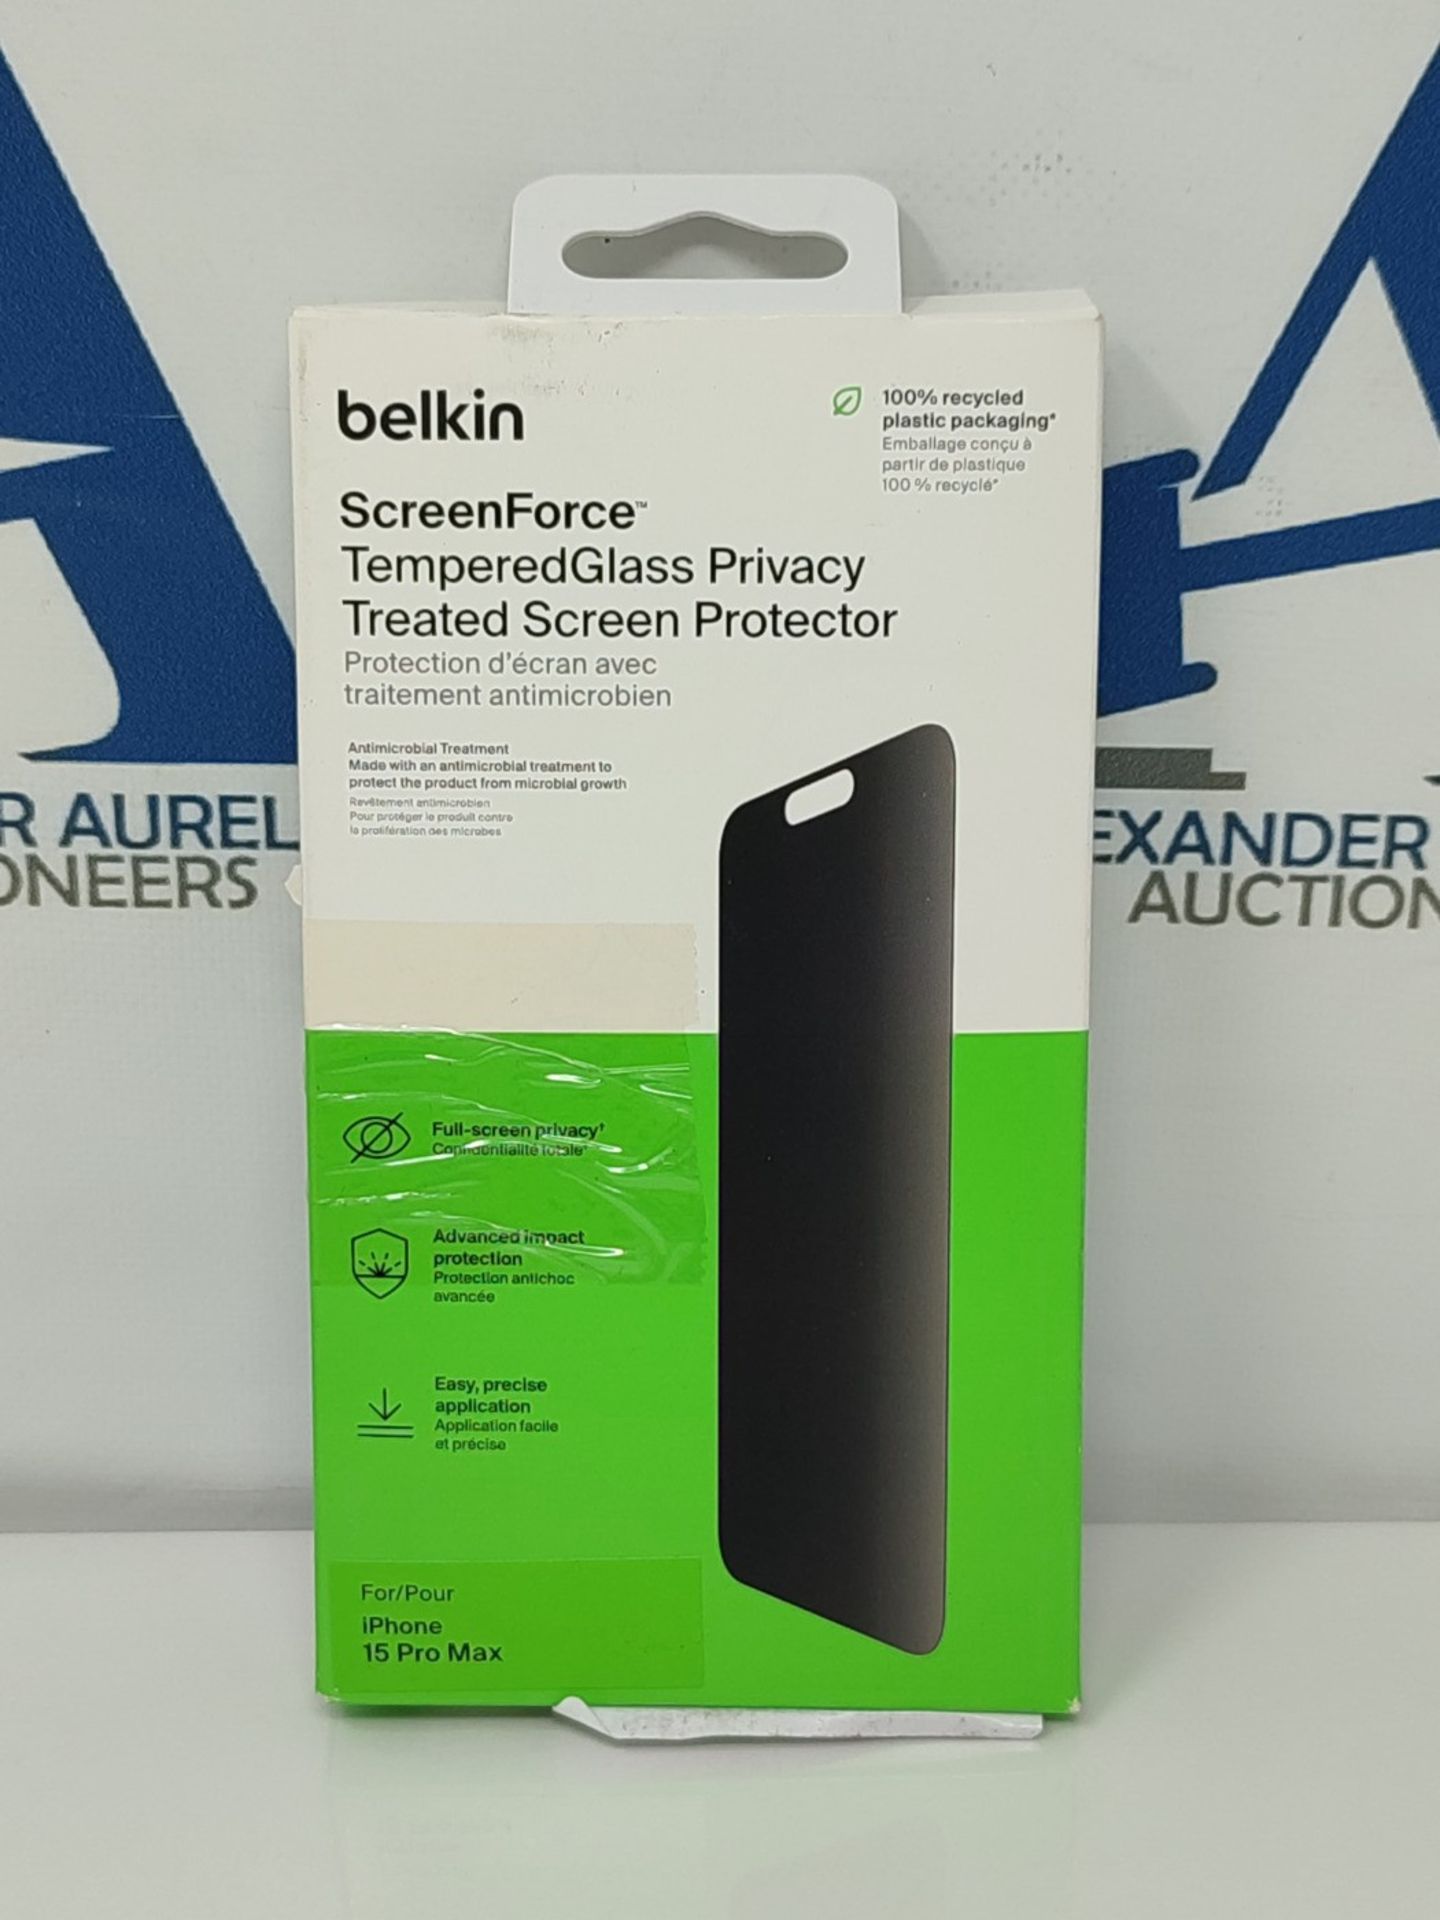 Belkin ScreenForce TemperedGlass Treated Privacy Screen Protector for iPhone 15 Pro Ma - Image 2 of 3